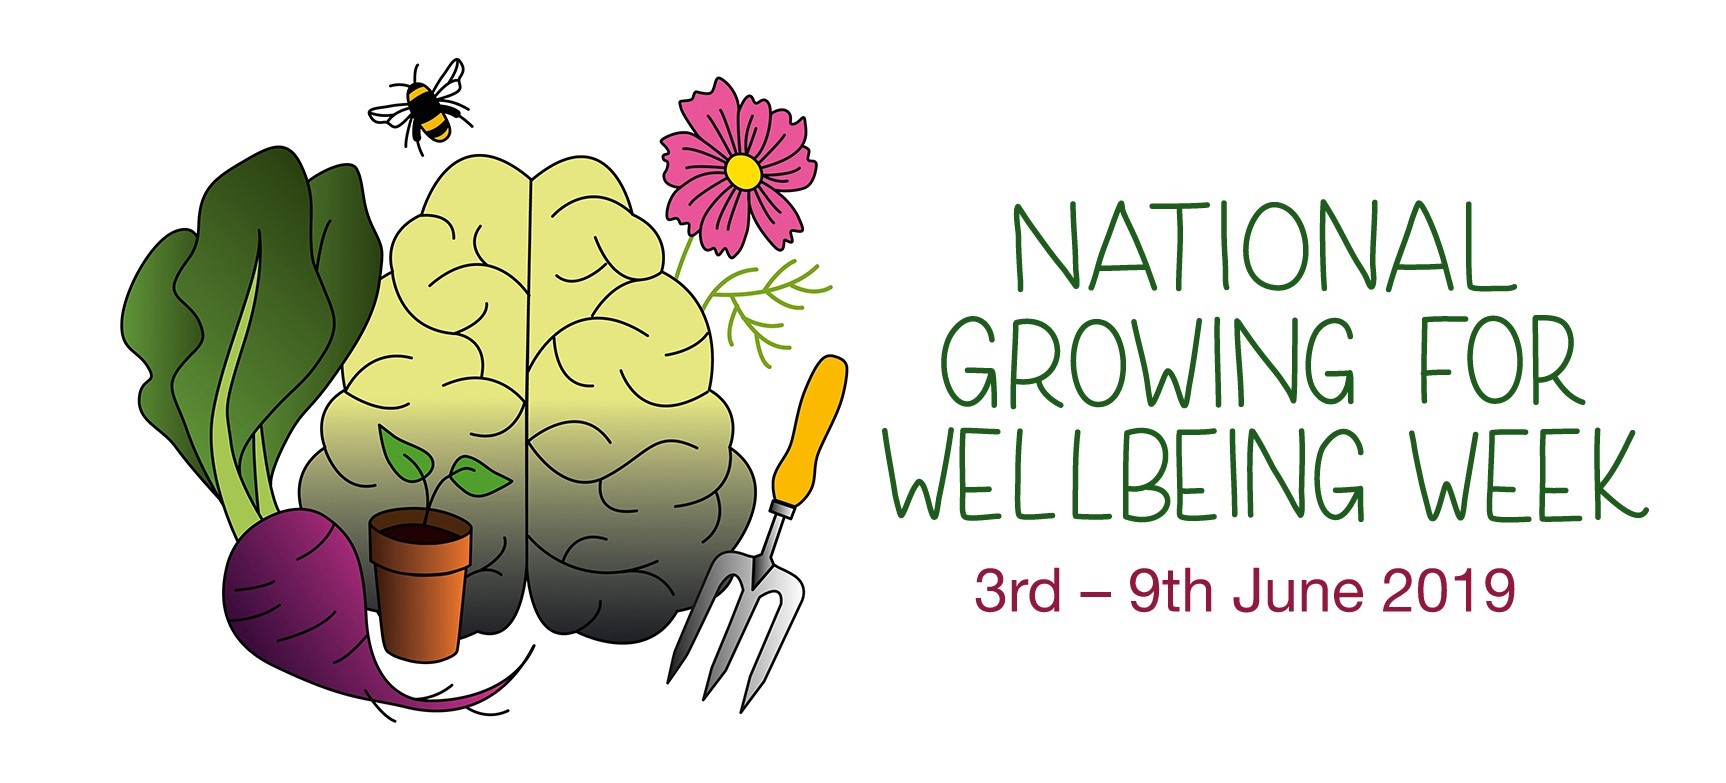 Life at no 27 wellbeing week